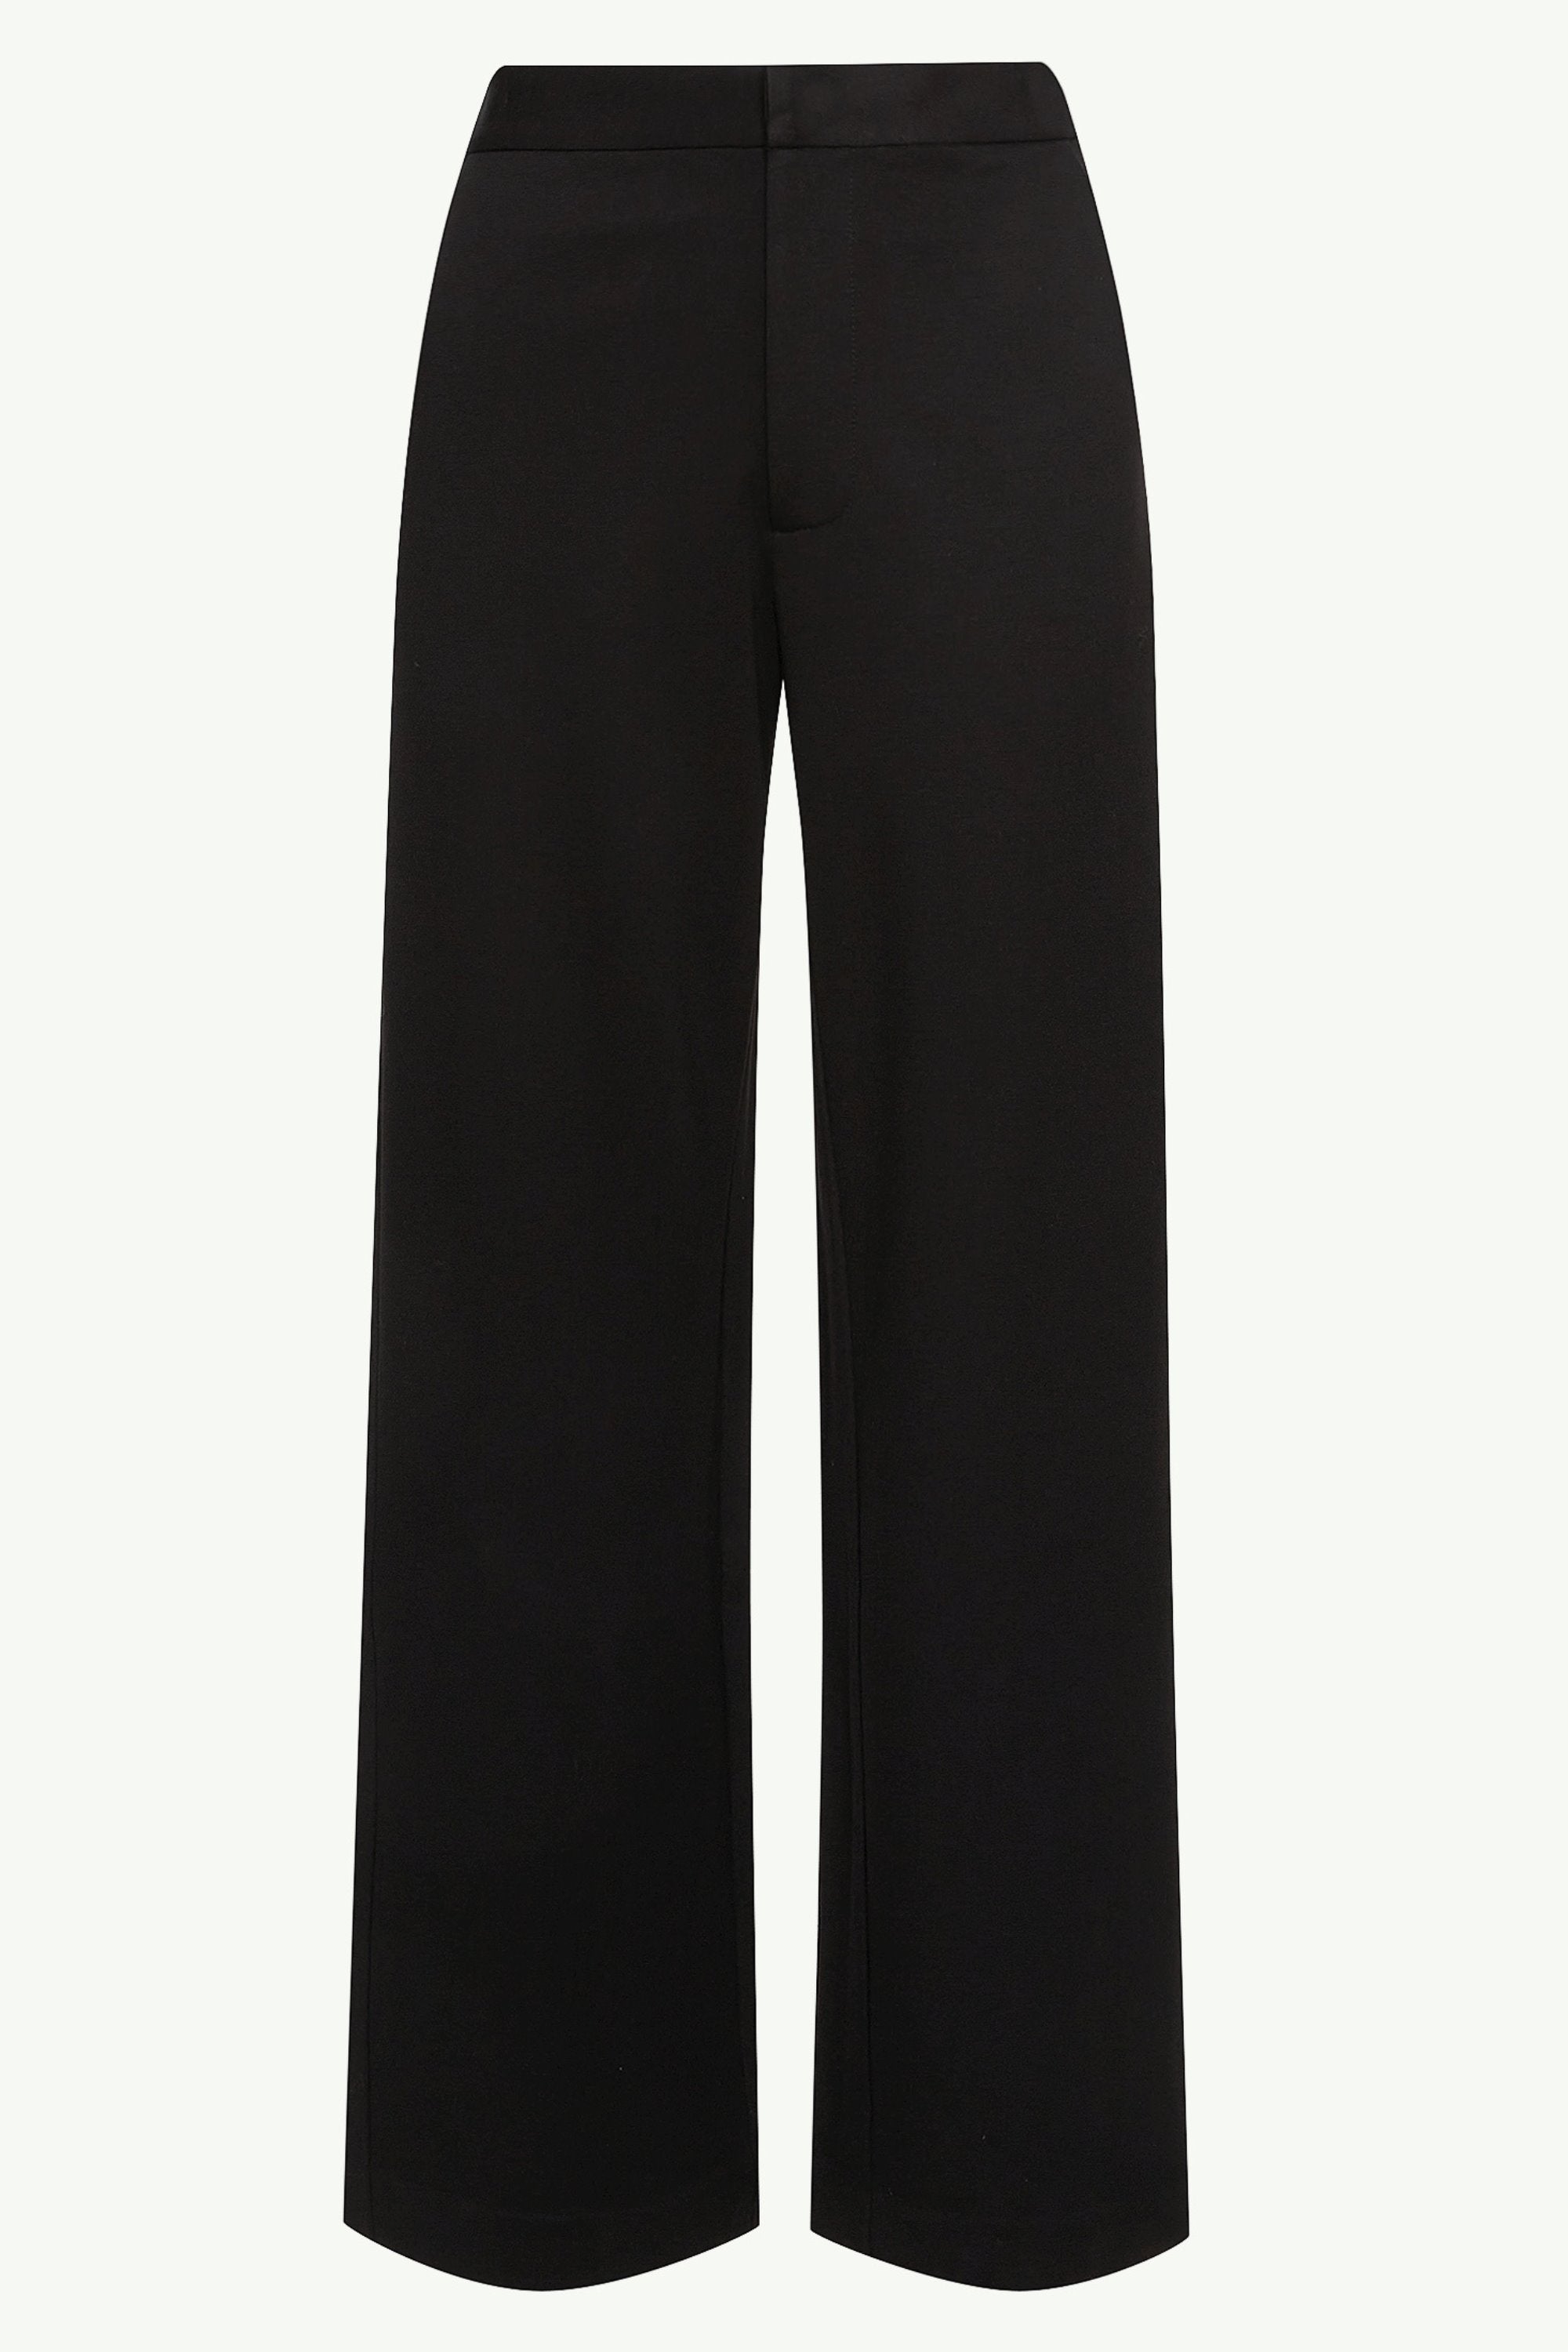 Essential Jersey Wide Leg Pants - Black Clothing Veiled 